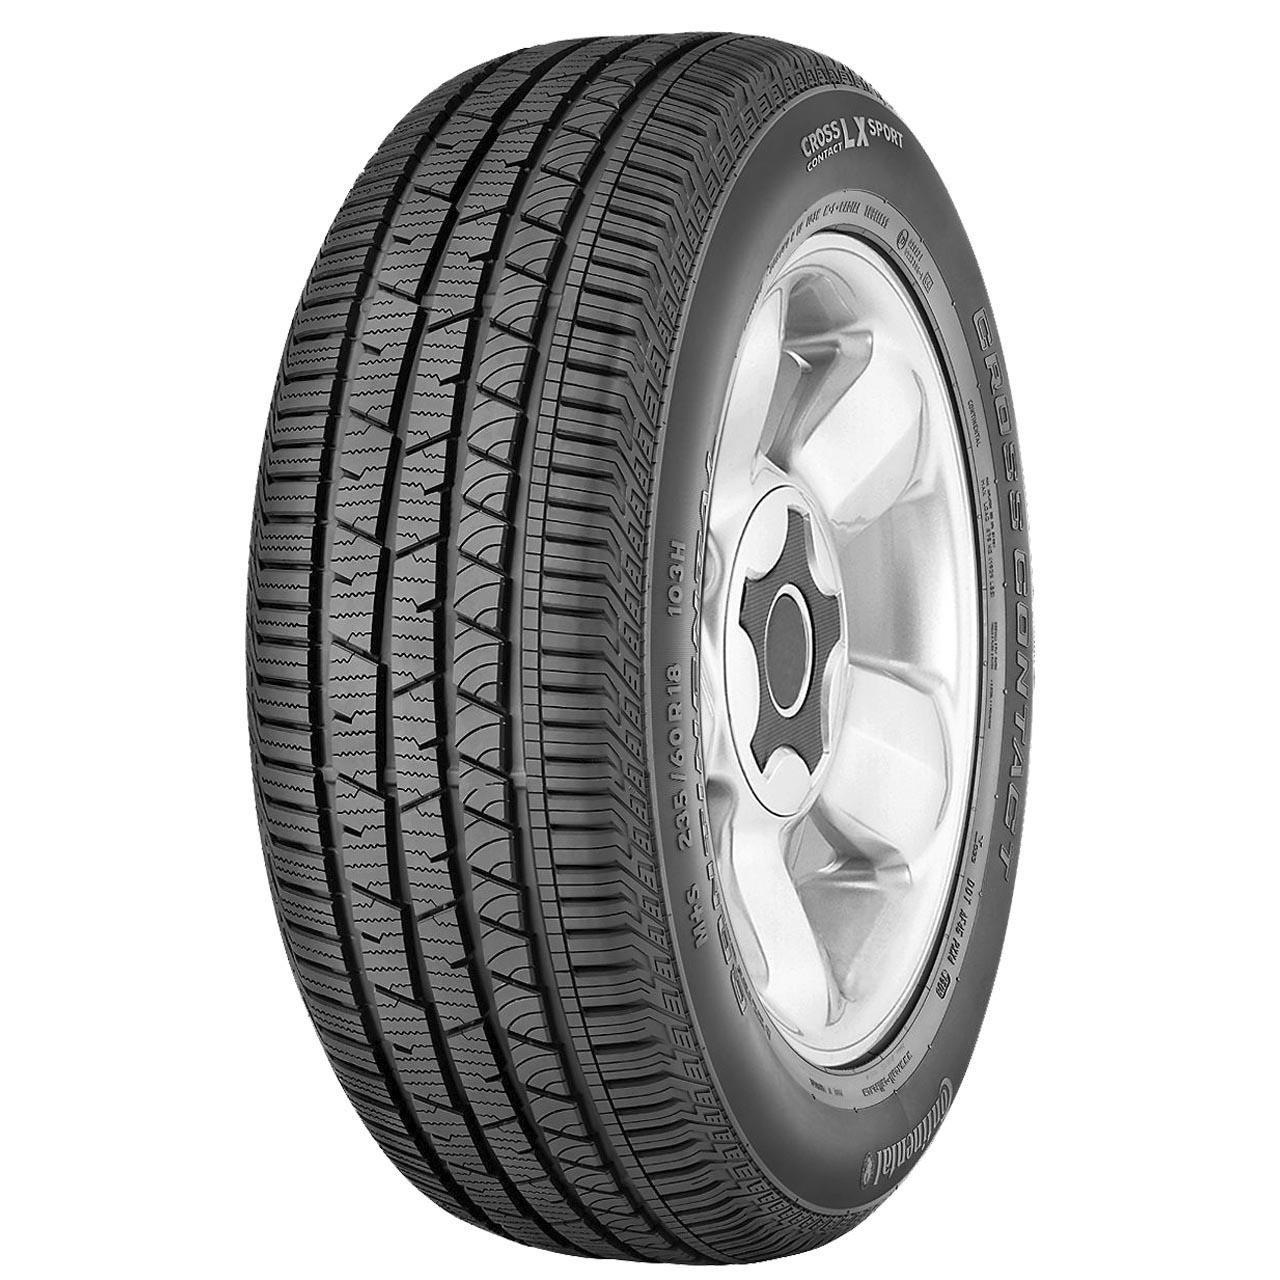 Continental CROSSCONTACT LX SPORT 265/40R21 101V FR FOR SIL